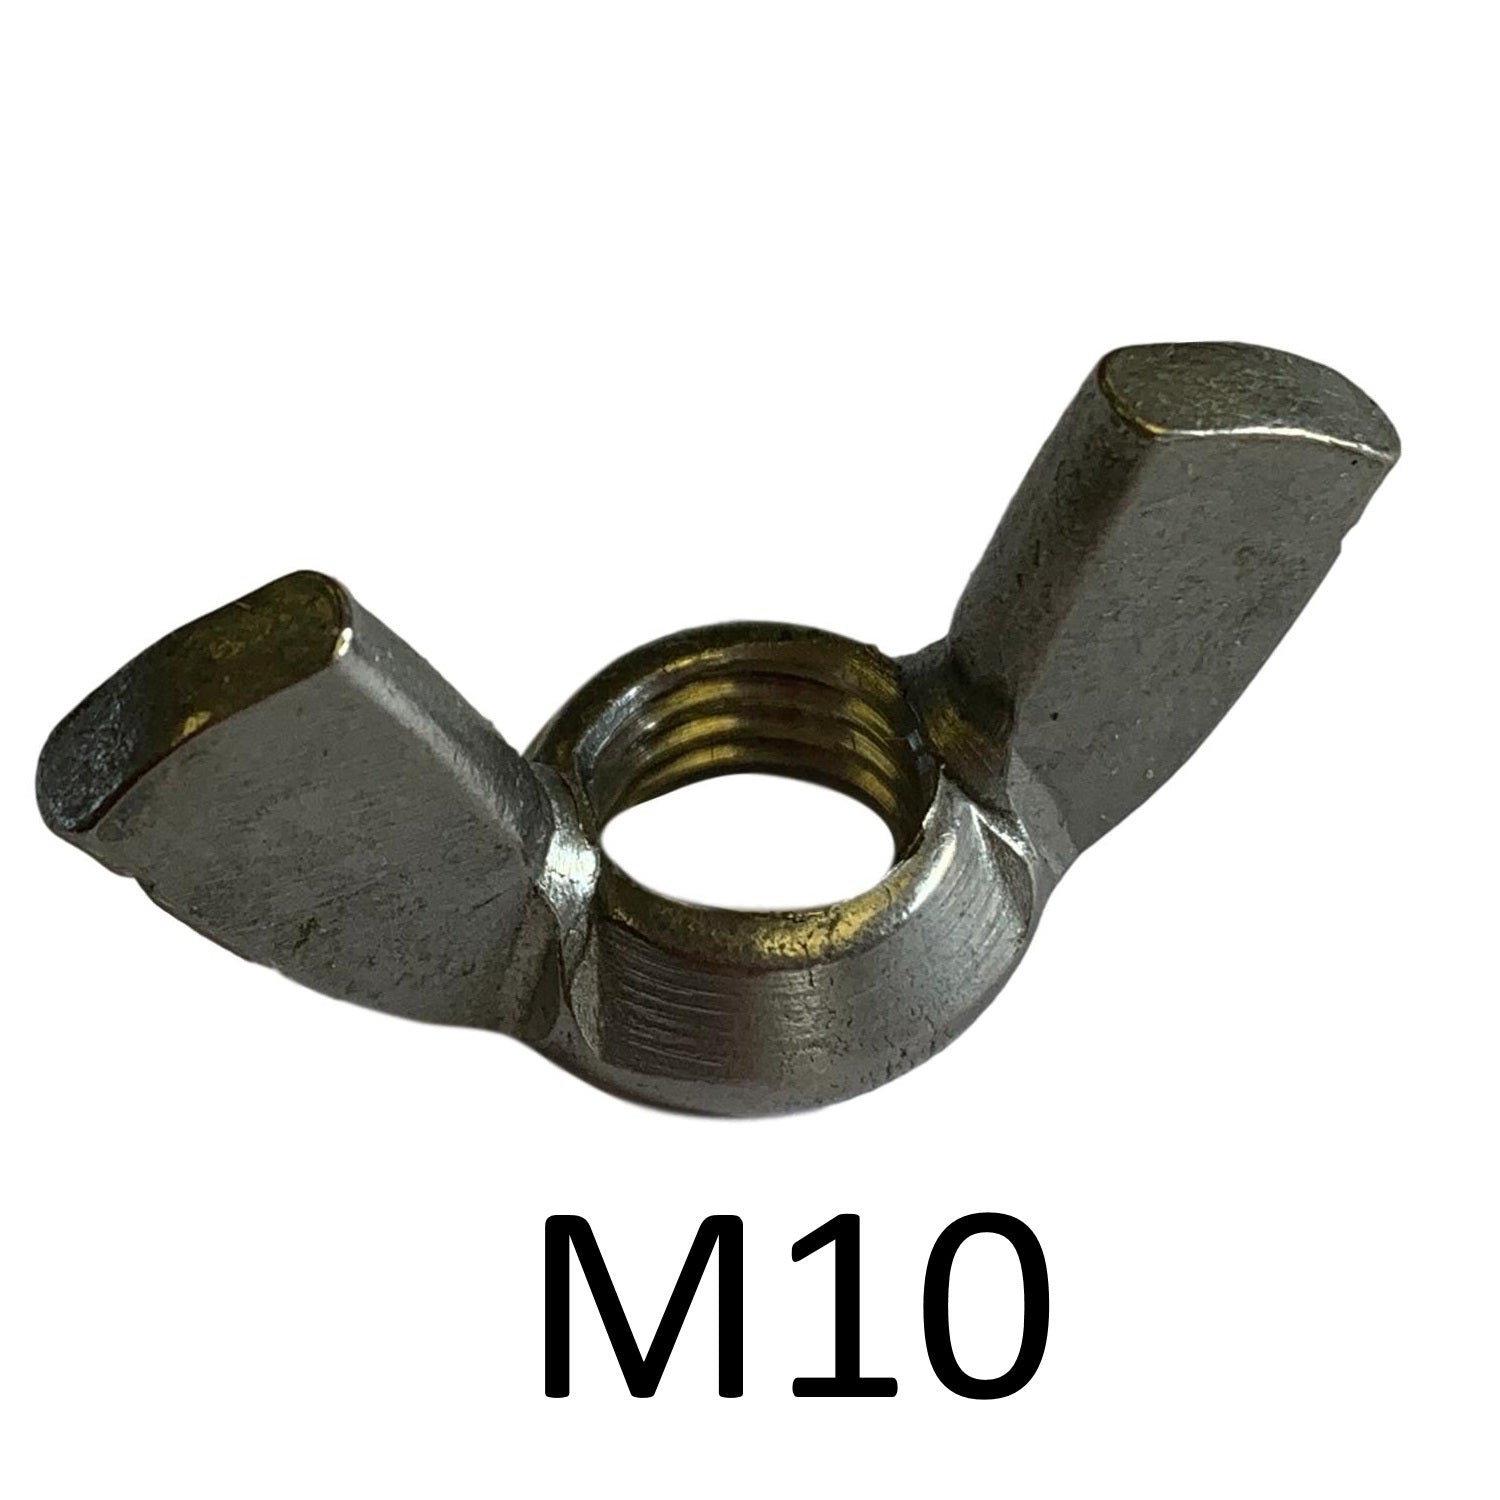 Holt Marine Wing Stainless Steel Metric Nuts Pkt2 - Various Sizes - Premium Wing Nuts from Holt Marine - Just $5.25! Shop now at W Hurst & Son (IW) Ltd